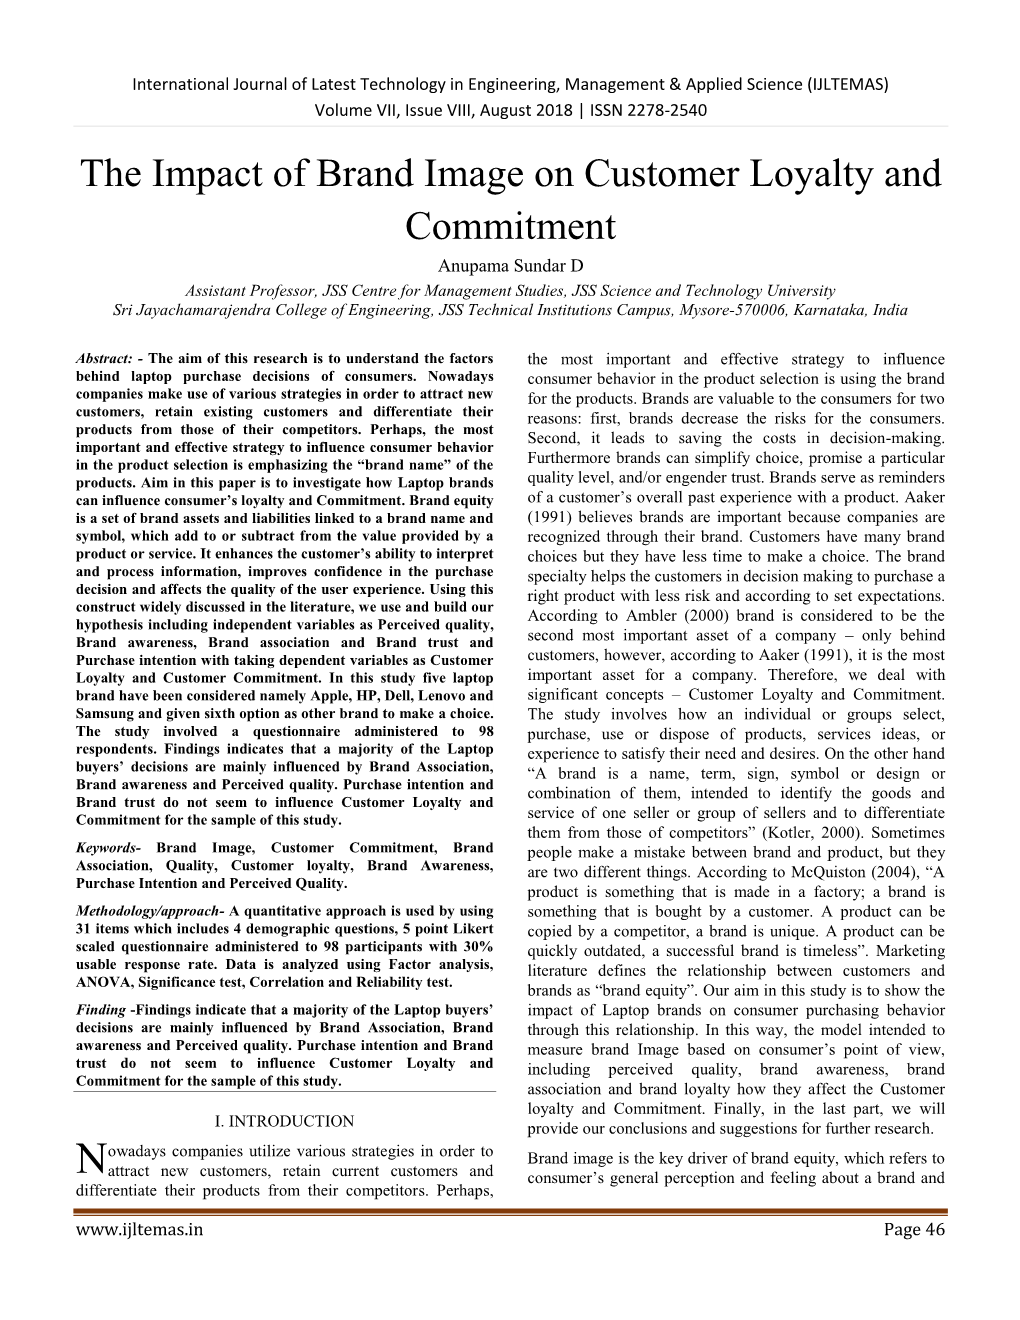 The Impact of Brand Image on Customer Loyalty and Commitment